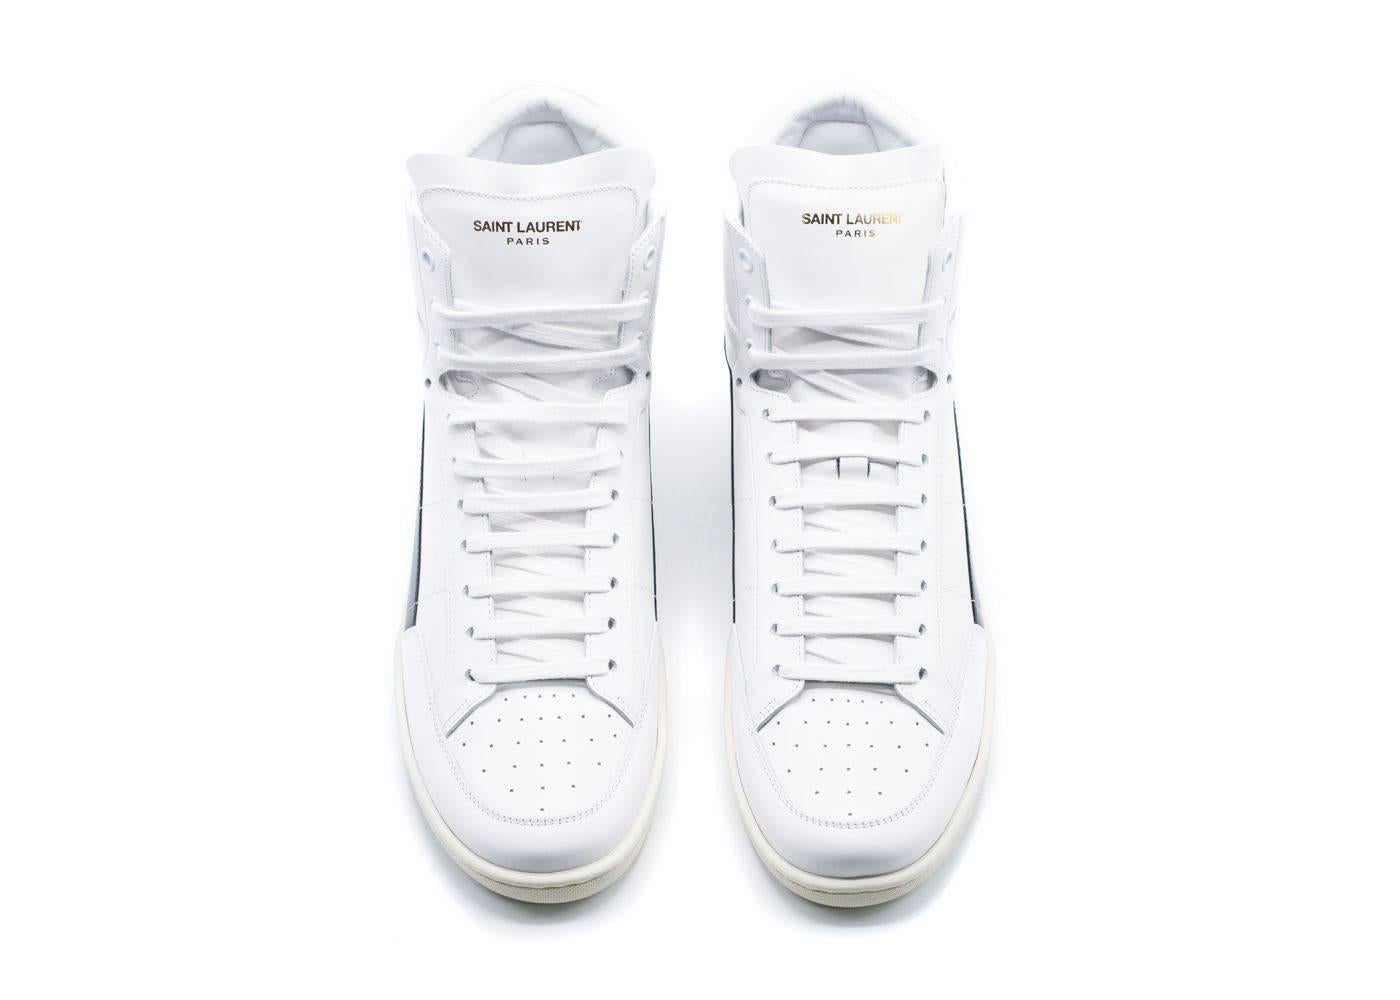 Brand New Saint Laurnet Men's Sneakers
Original Box & Dust Bag Included
Retails in Stores & Online forg $595
Size E42 / US9 Fits True to Size

Saint Laurent's signature court classic SL/36H sneakers in a high top silhouette. Perfect for everyday